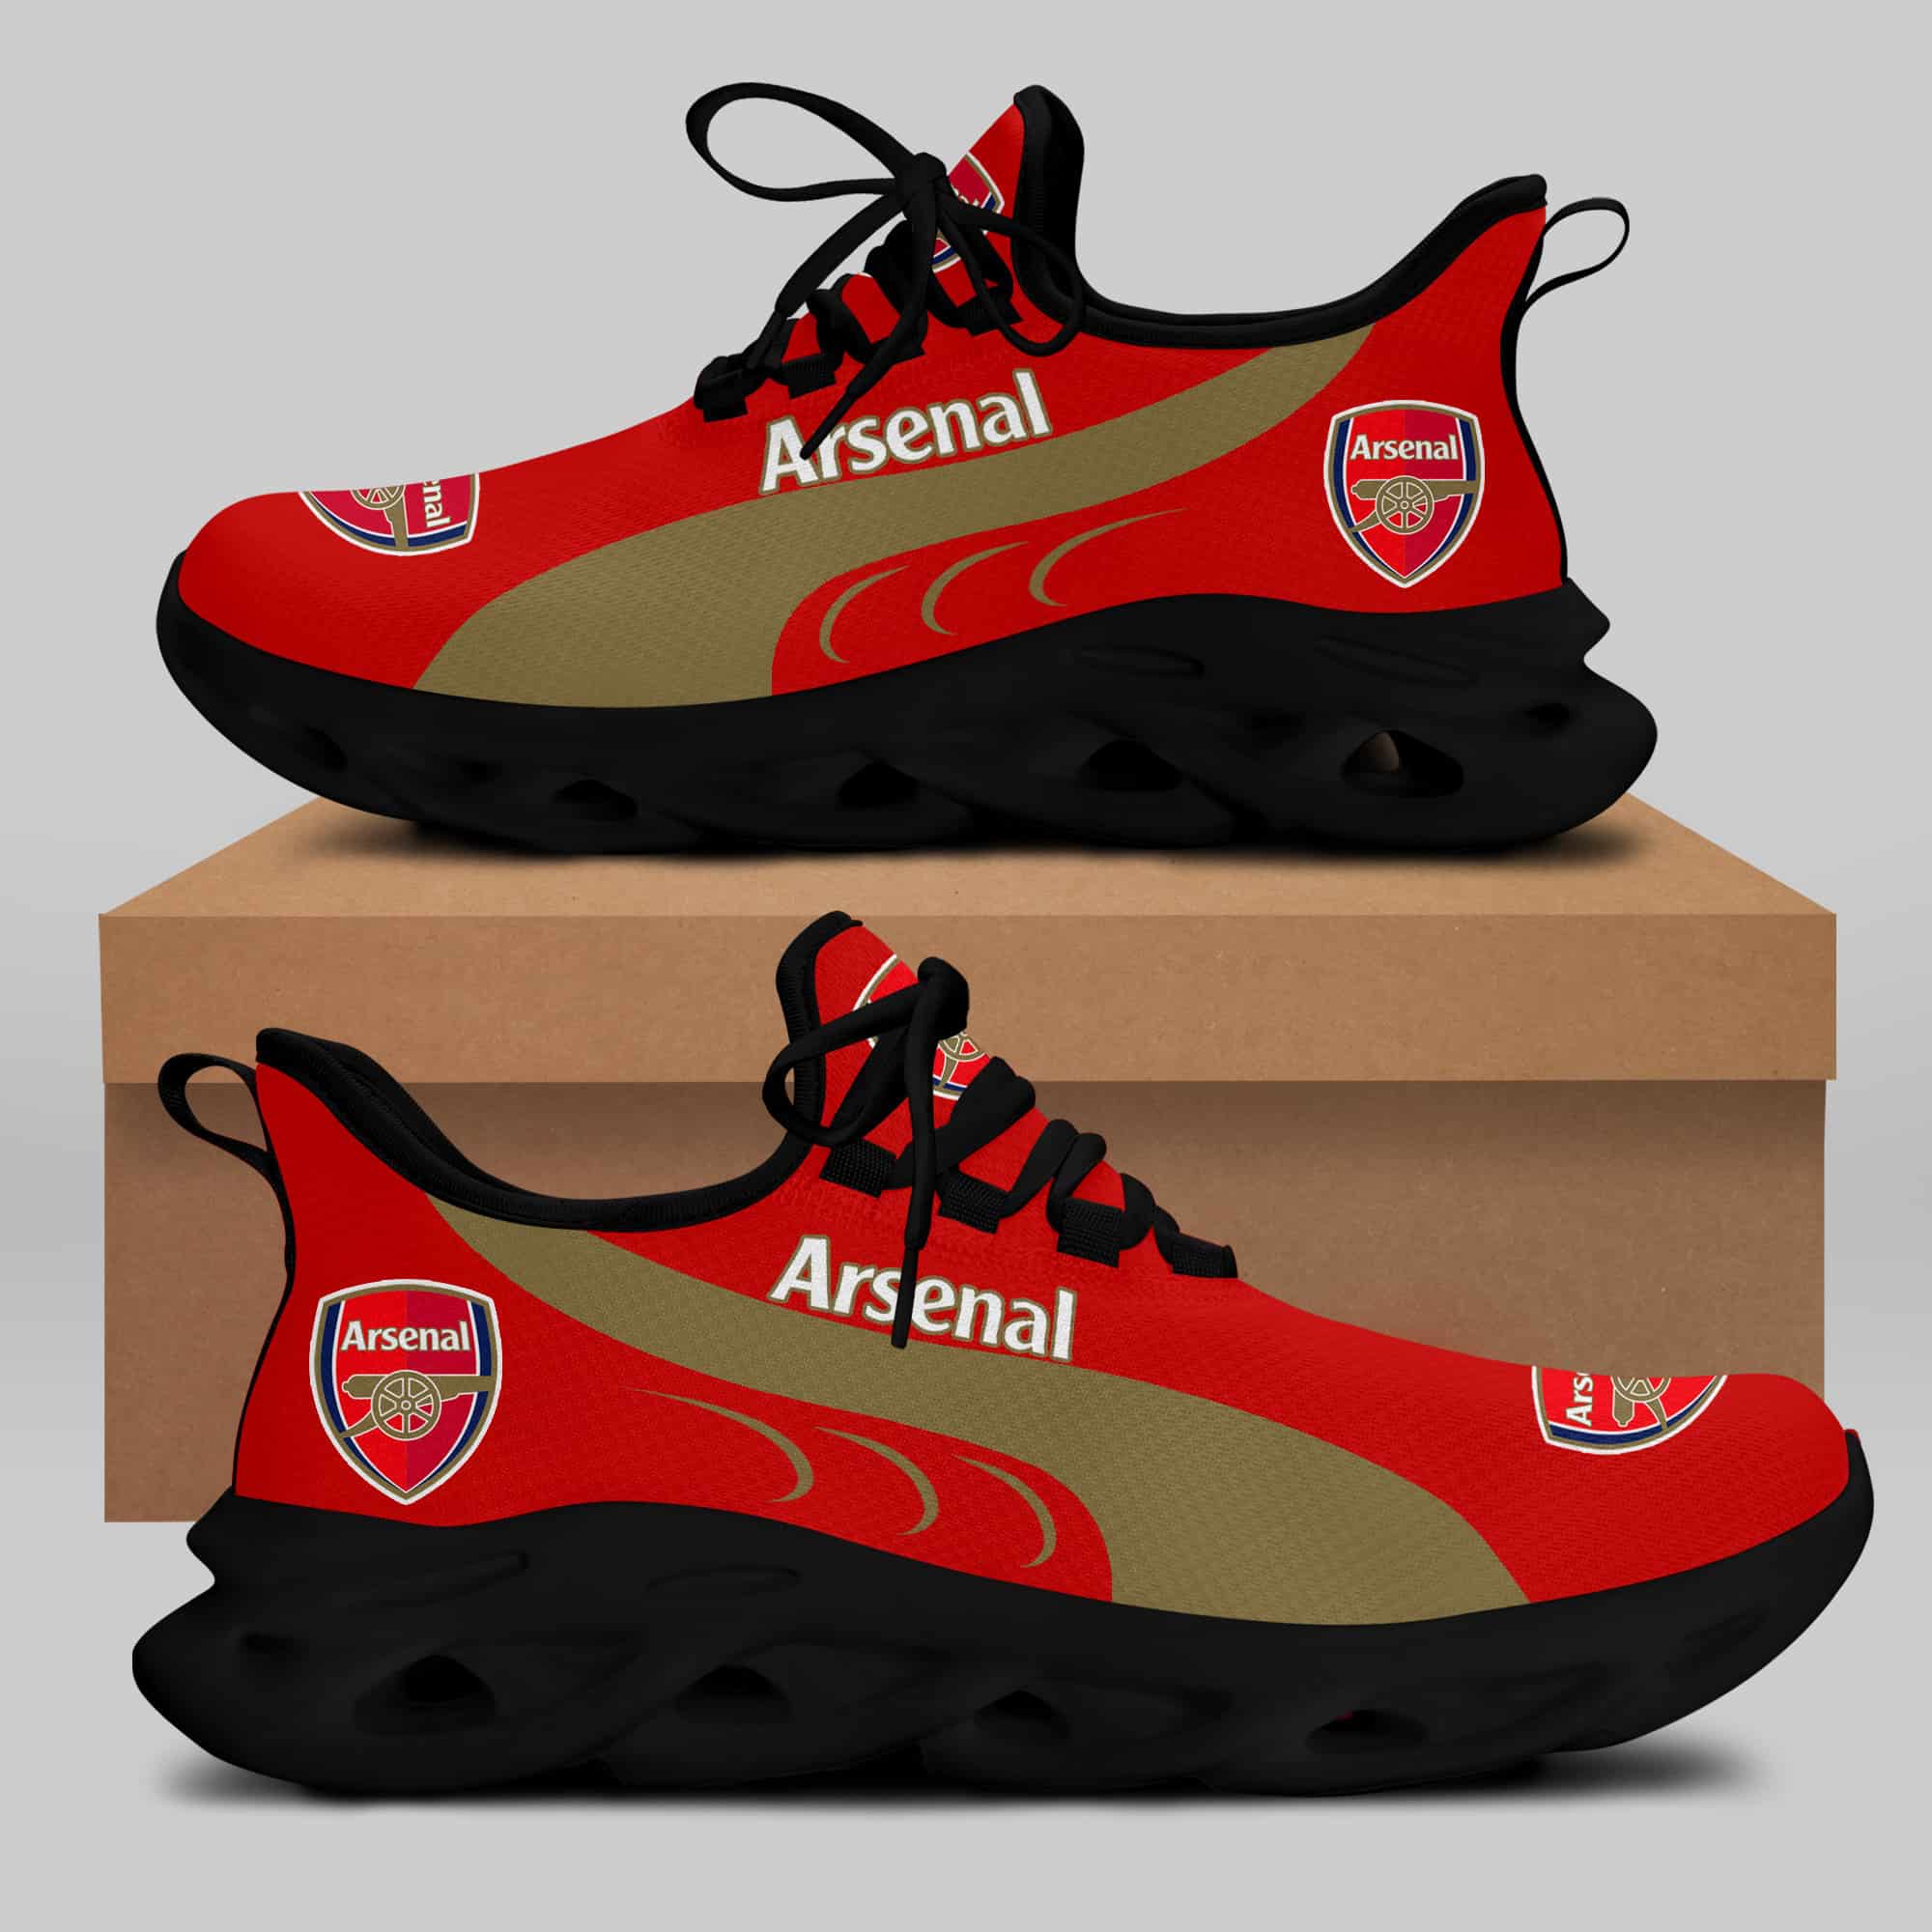 Arsenal Running Shoes Max Soul Shoes Sneakers Ver 4 2